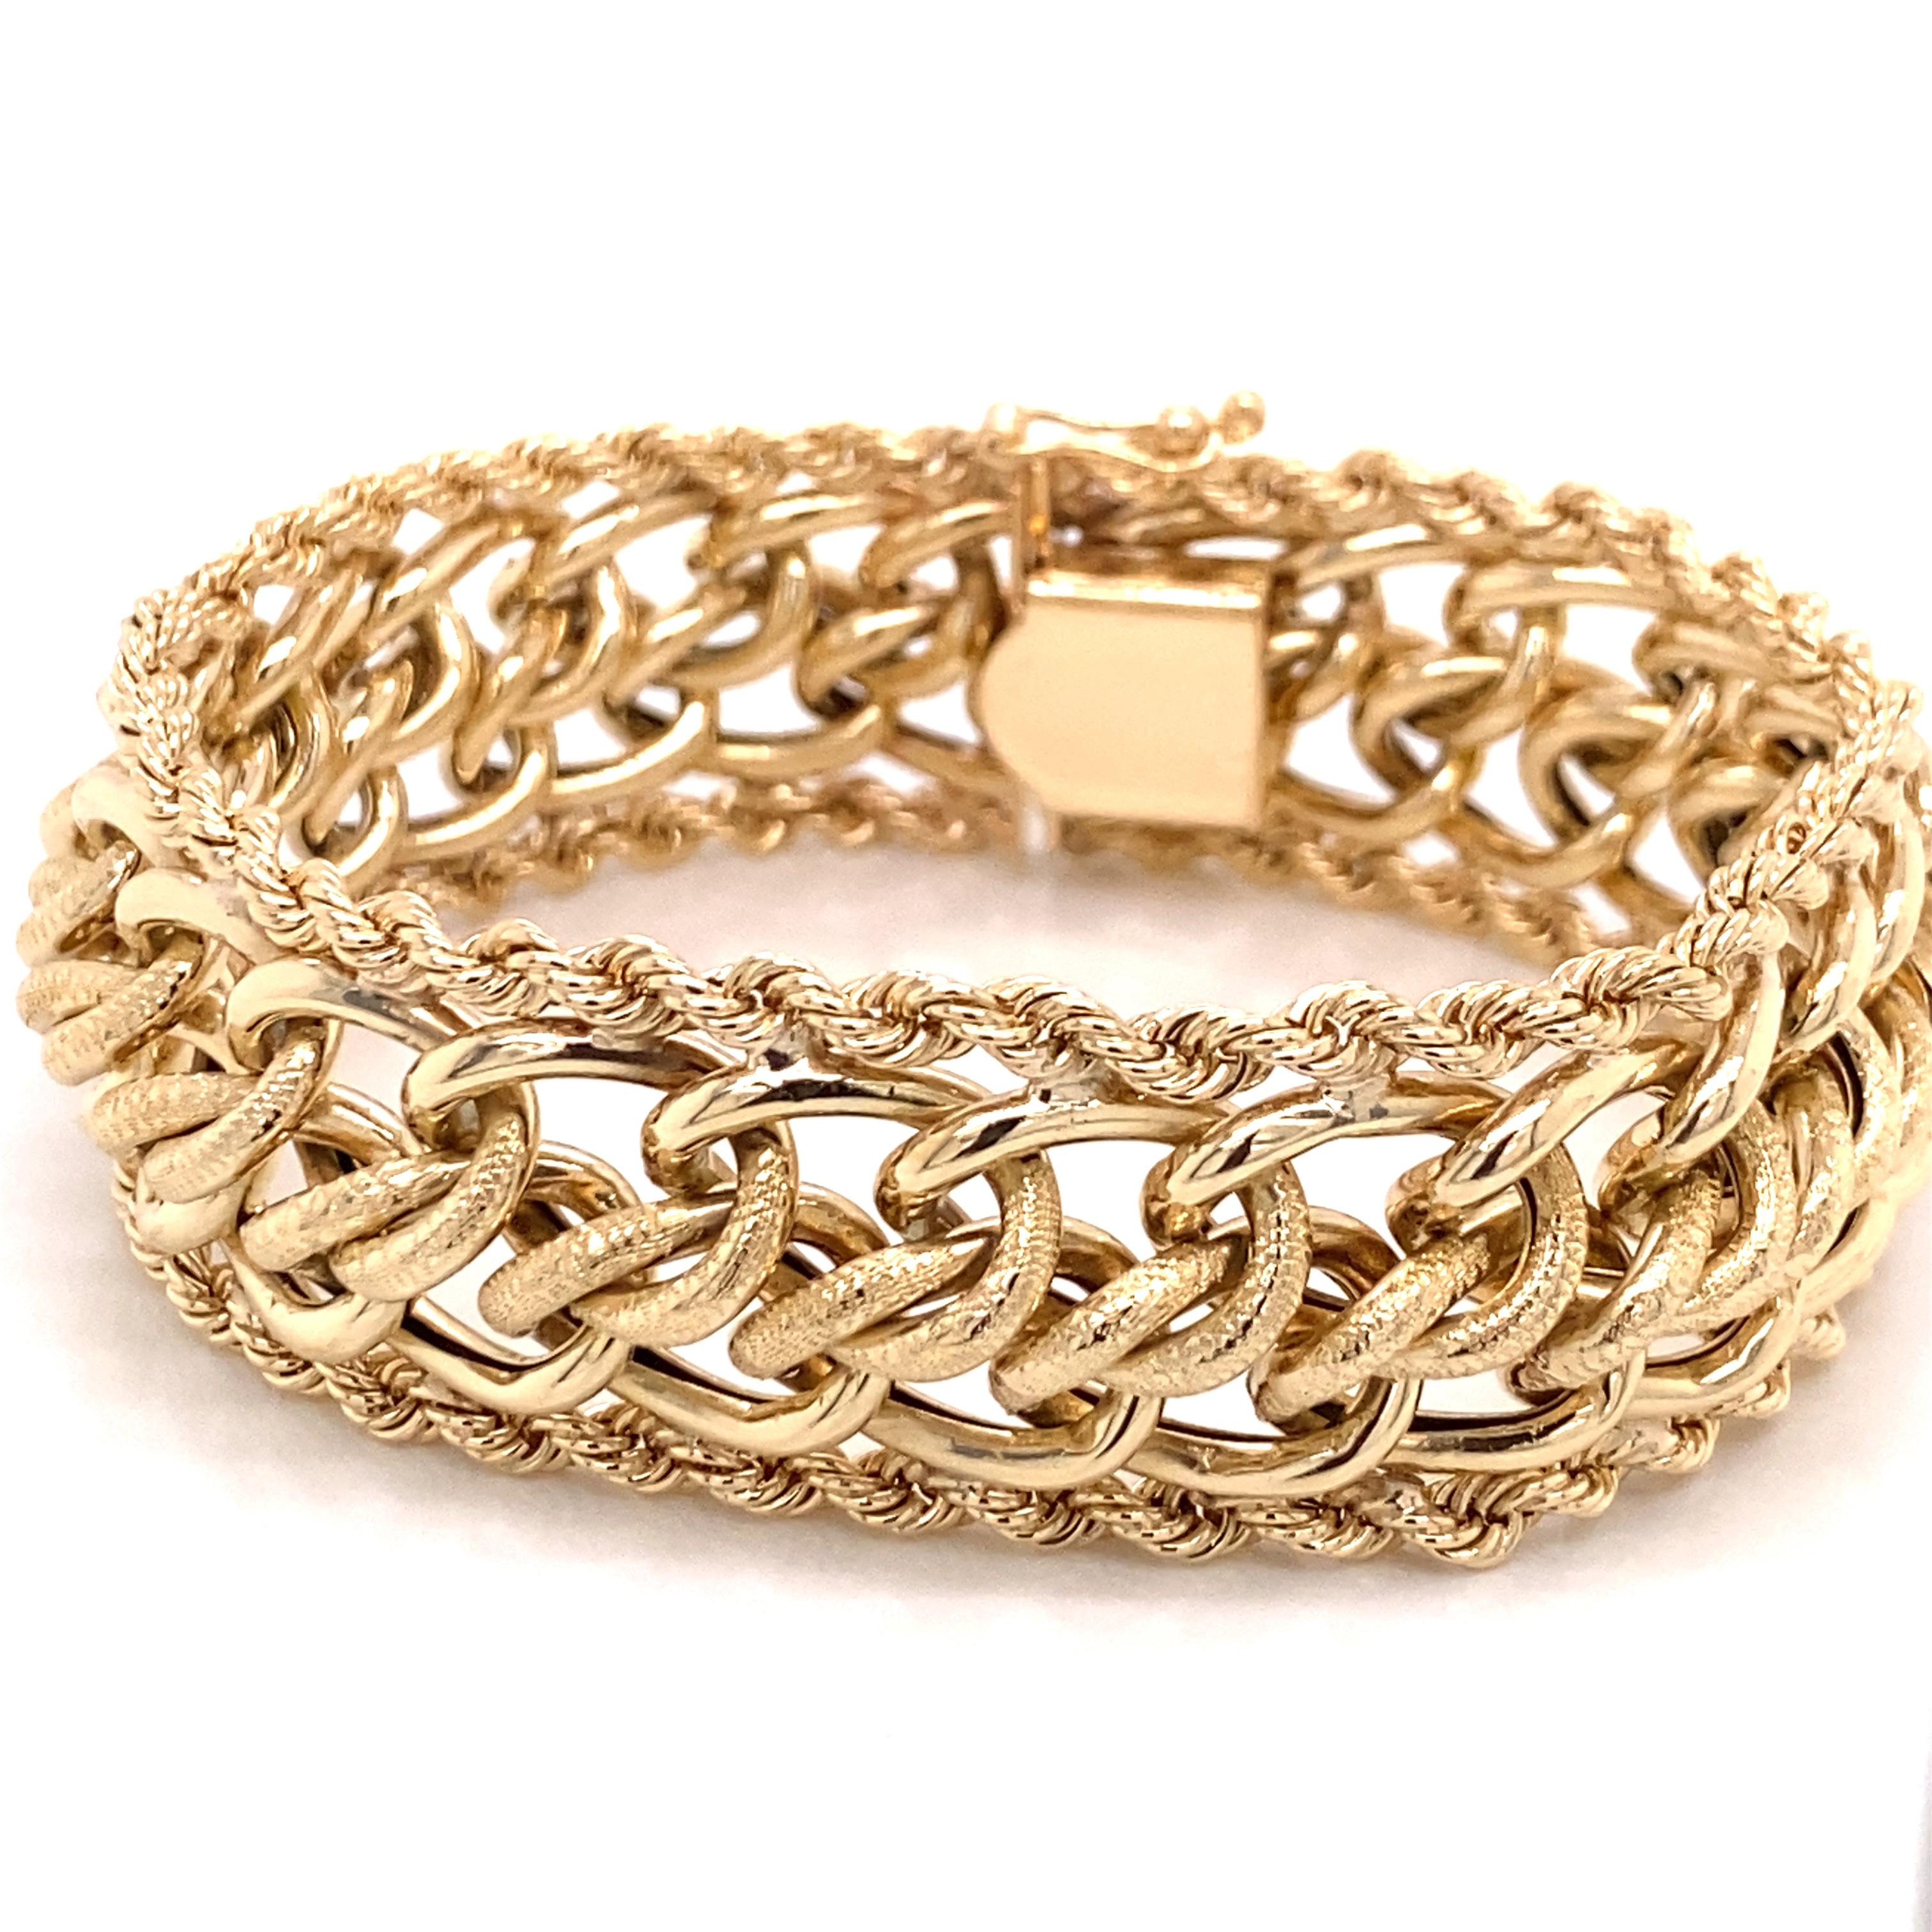 Women's Vintage 1980's 14k Yellow Gold Wide Link with Rope Edge Bracelet